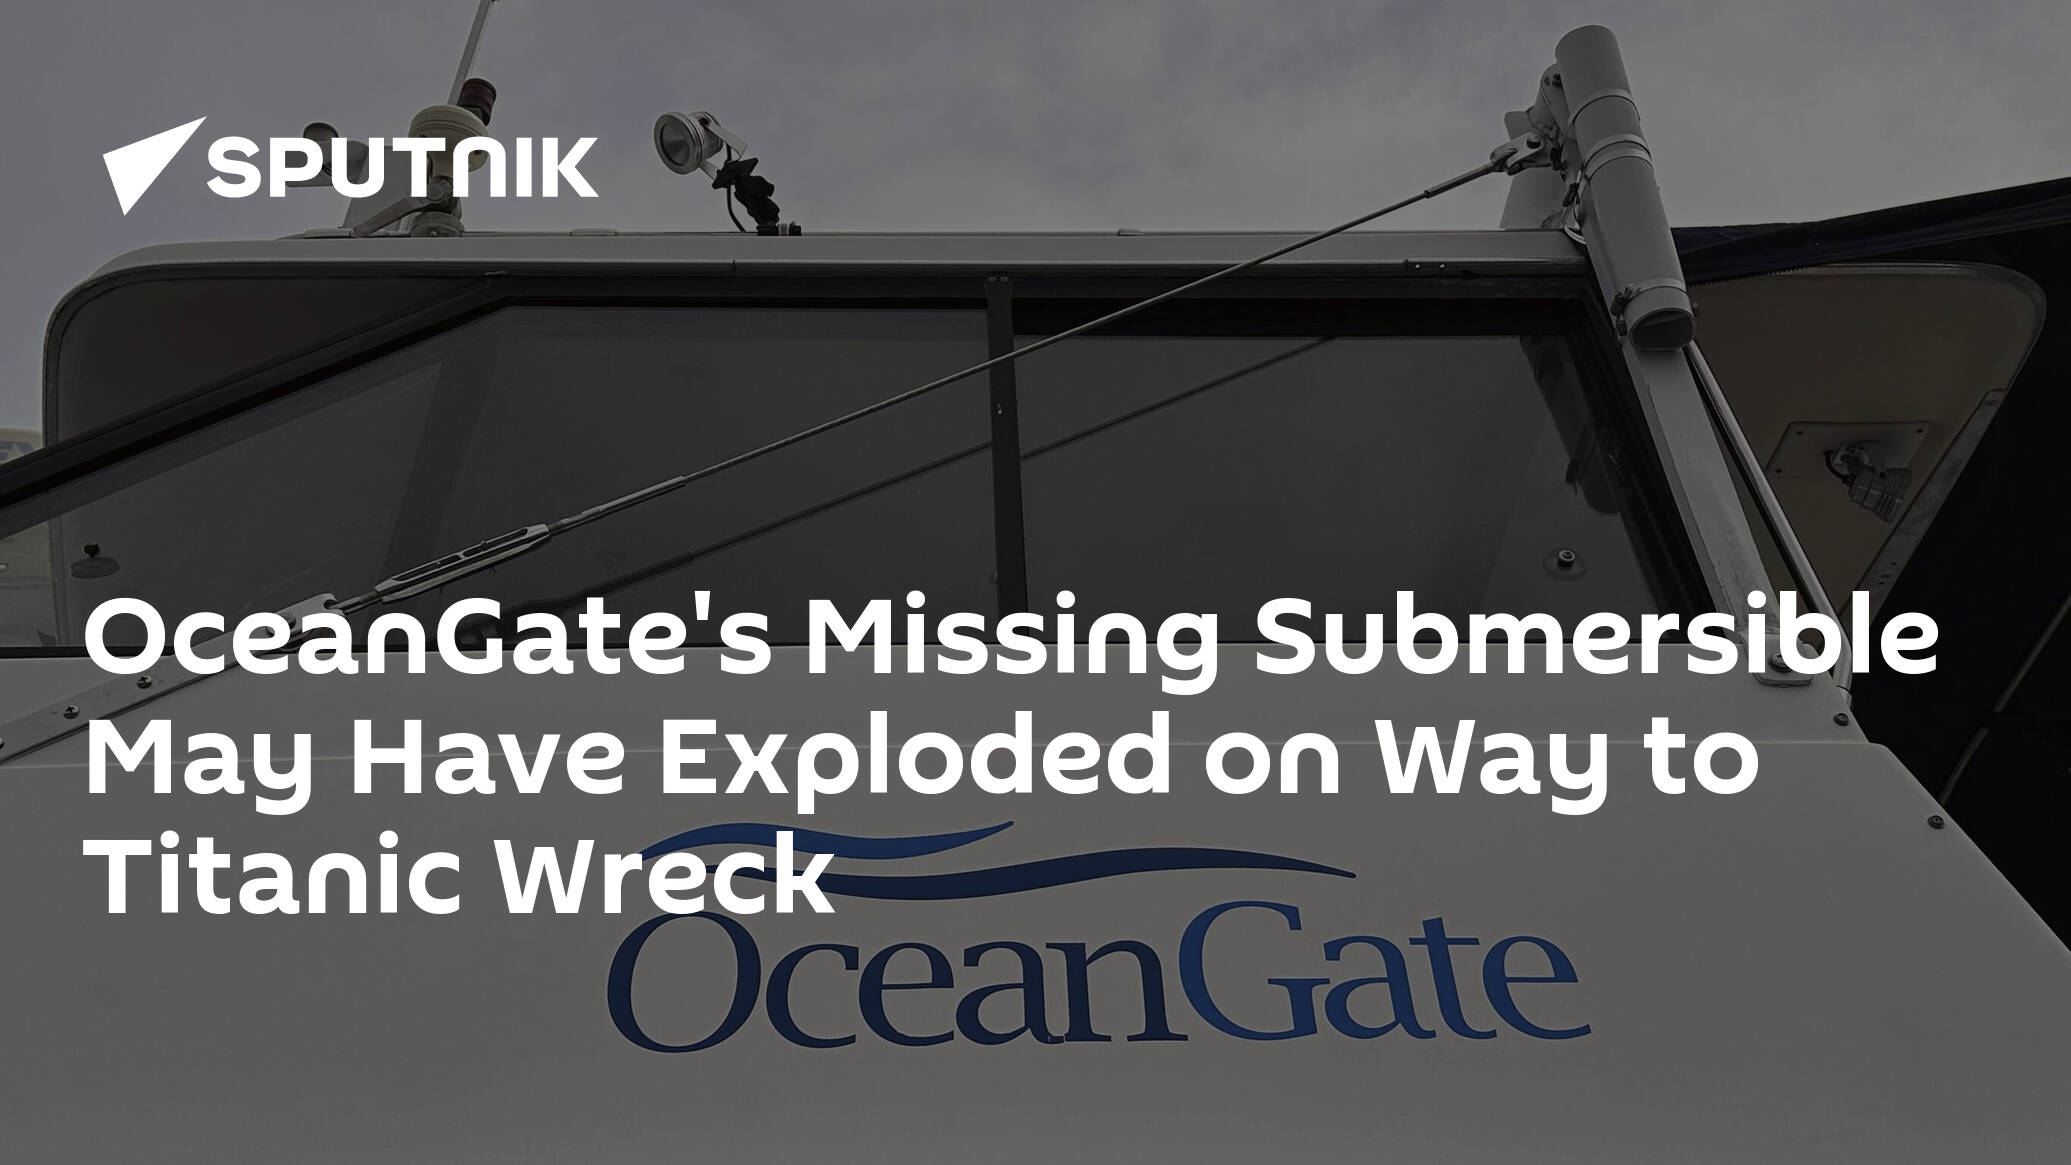 OceanGate's Missing Submersible May Have Exploded on Way to Titanic Wreck